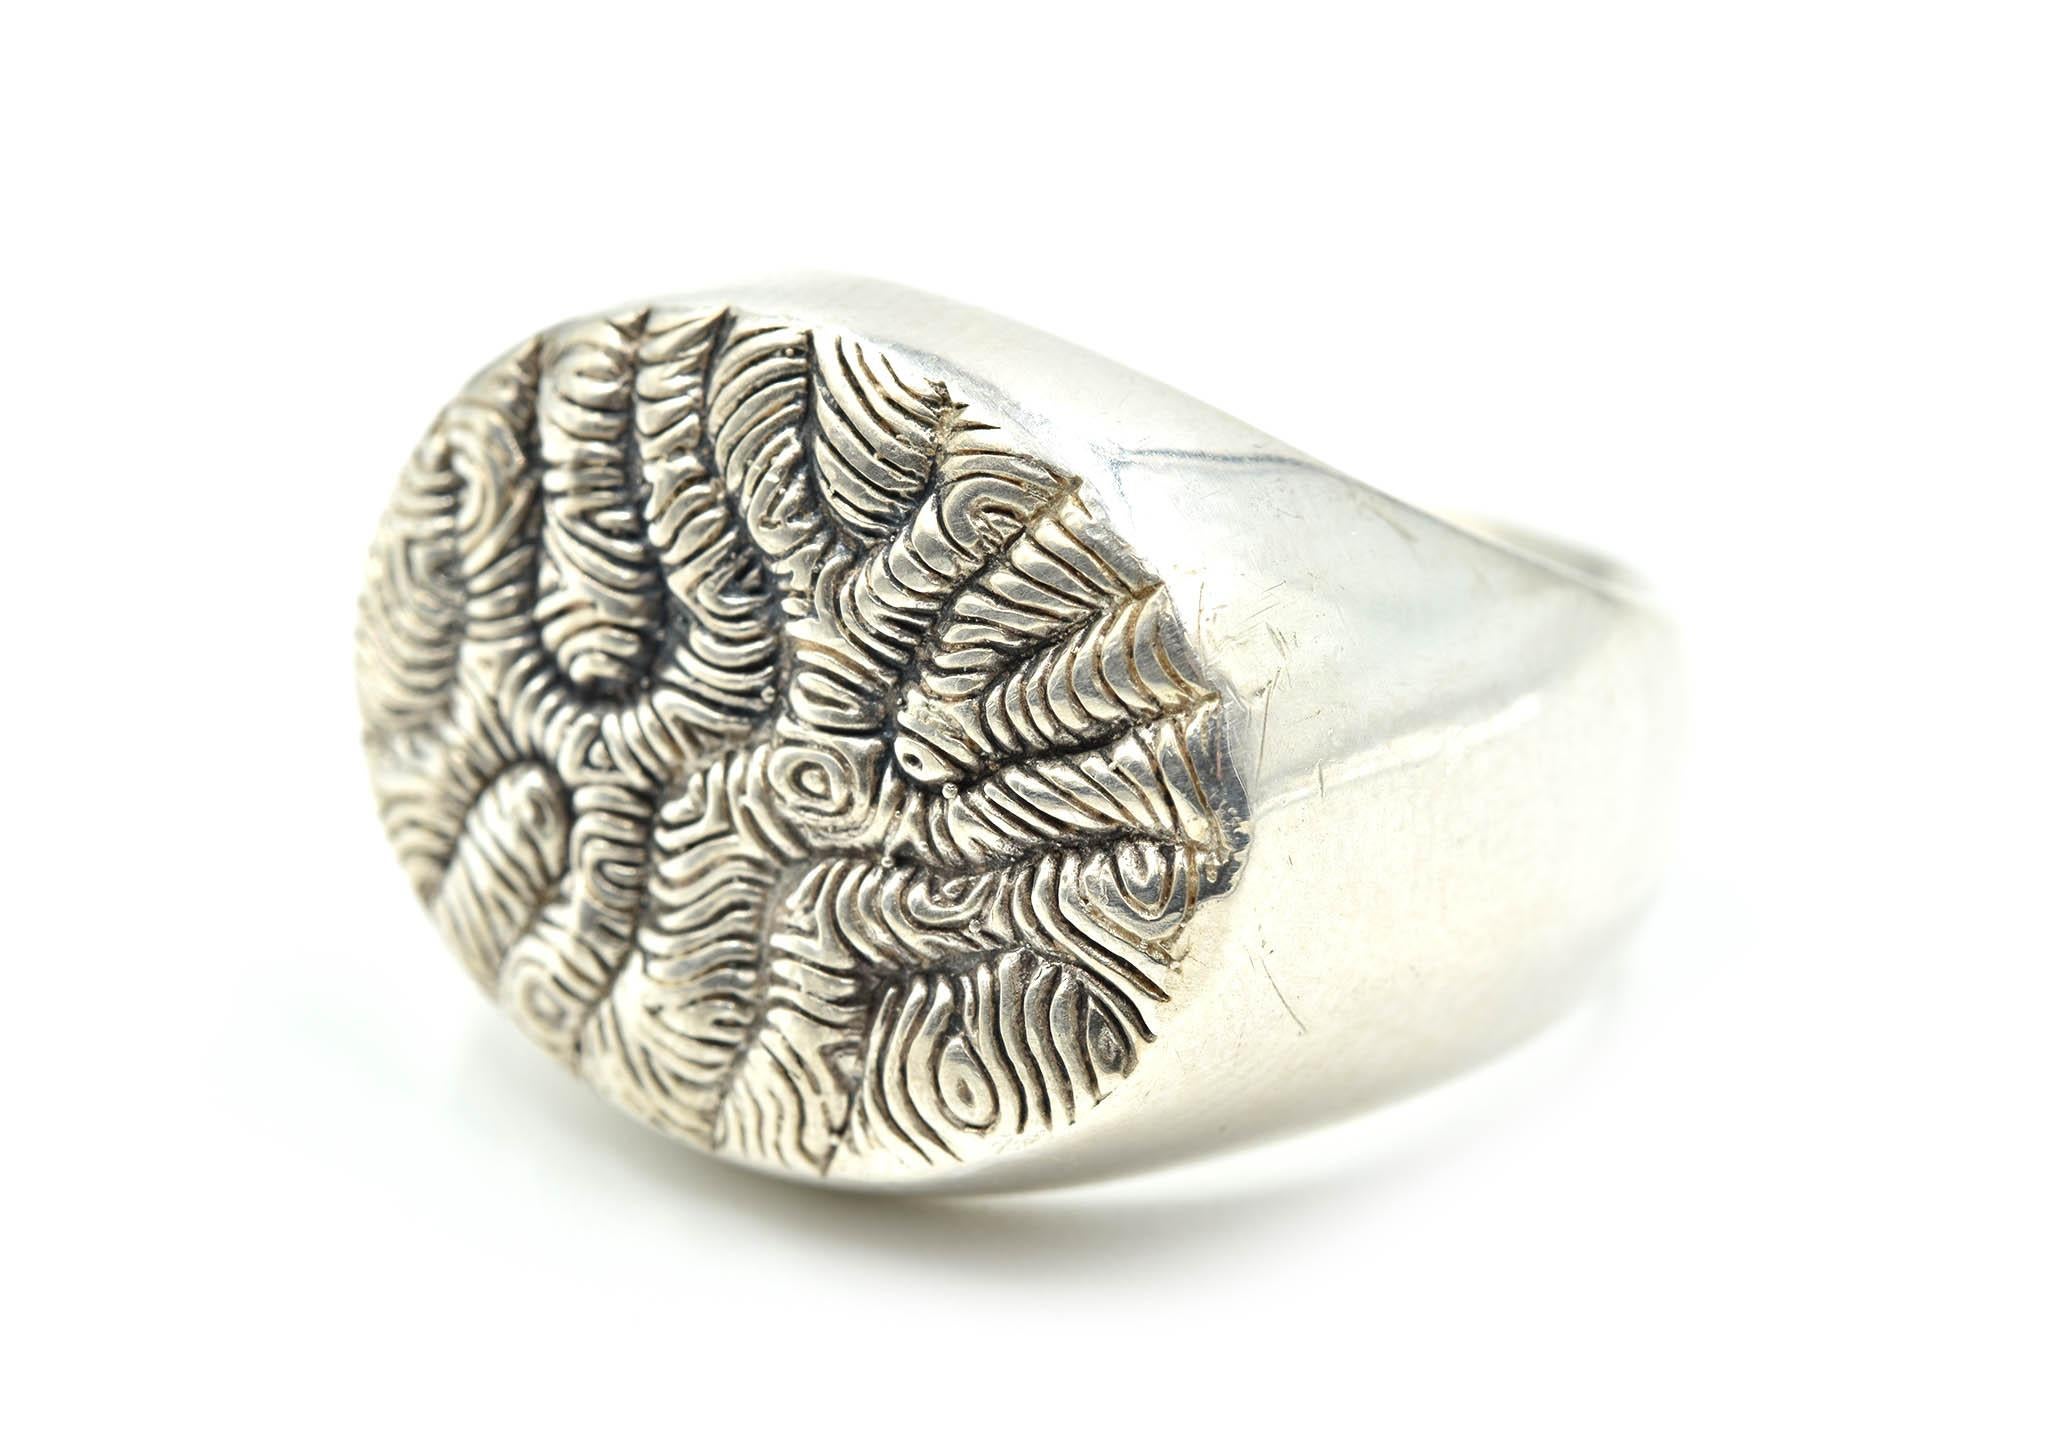 This striking, sterling silver, David Yurman ring features iconic David Yurman designs on the top of the ring. This ring consists of sterling silver with an 18k yellow gold accent! The top of the ring is made with etchings and texture to make the